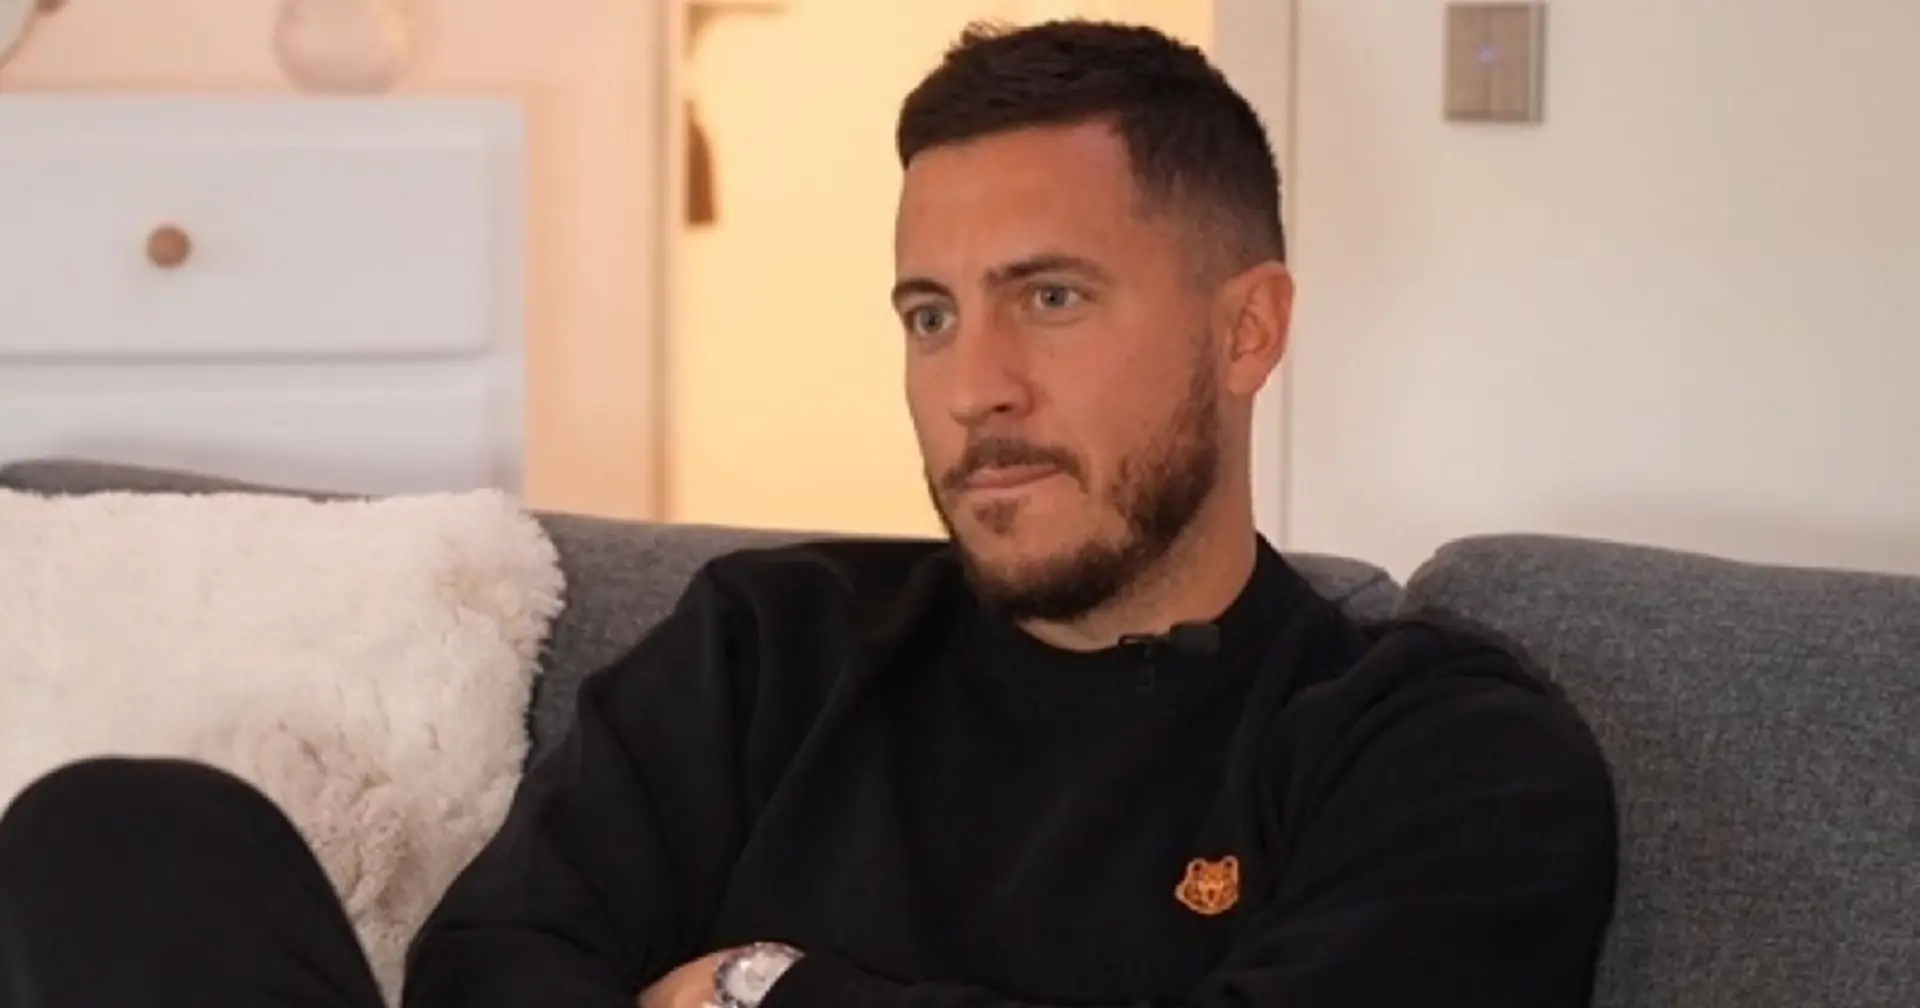 'I didn't want to go play somewhere for the money': Hazard says retirement decision was 'simple'